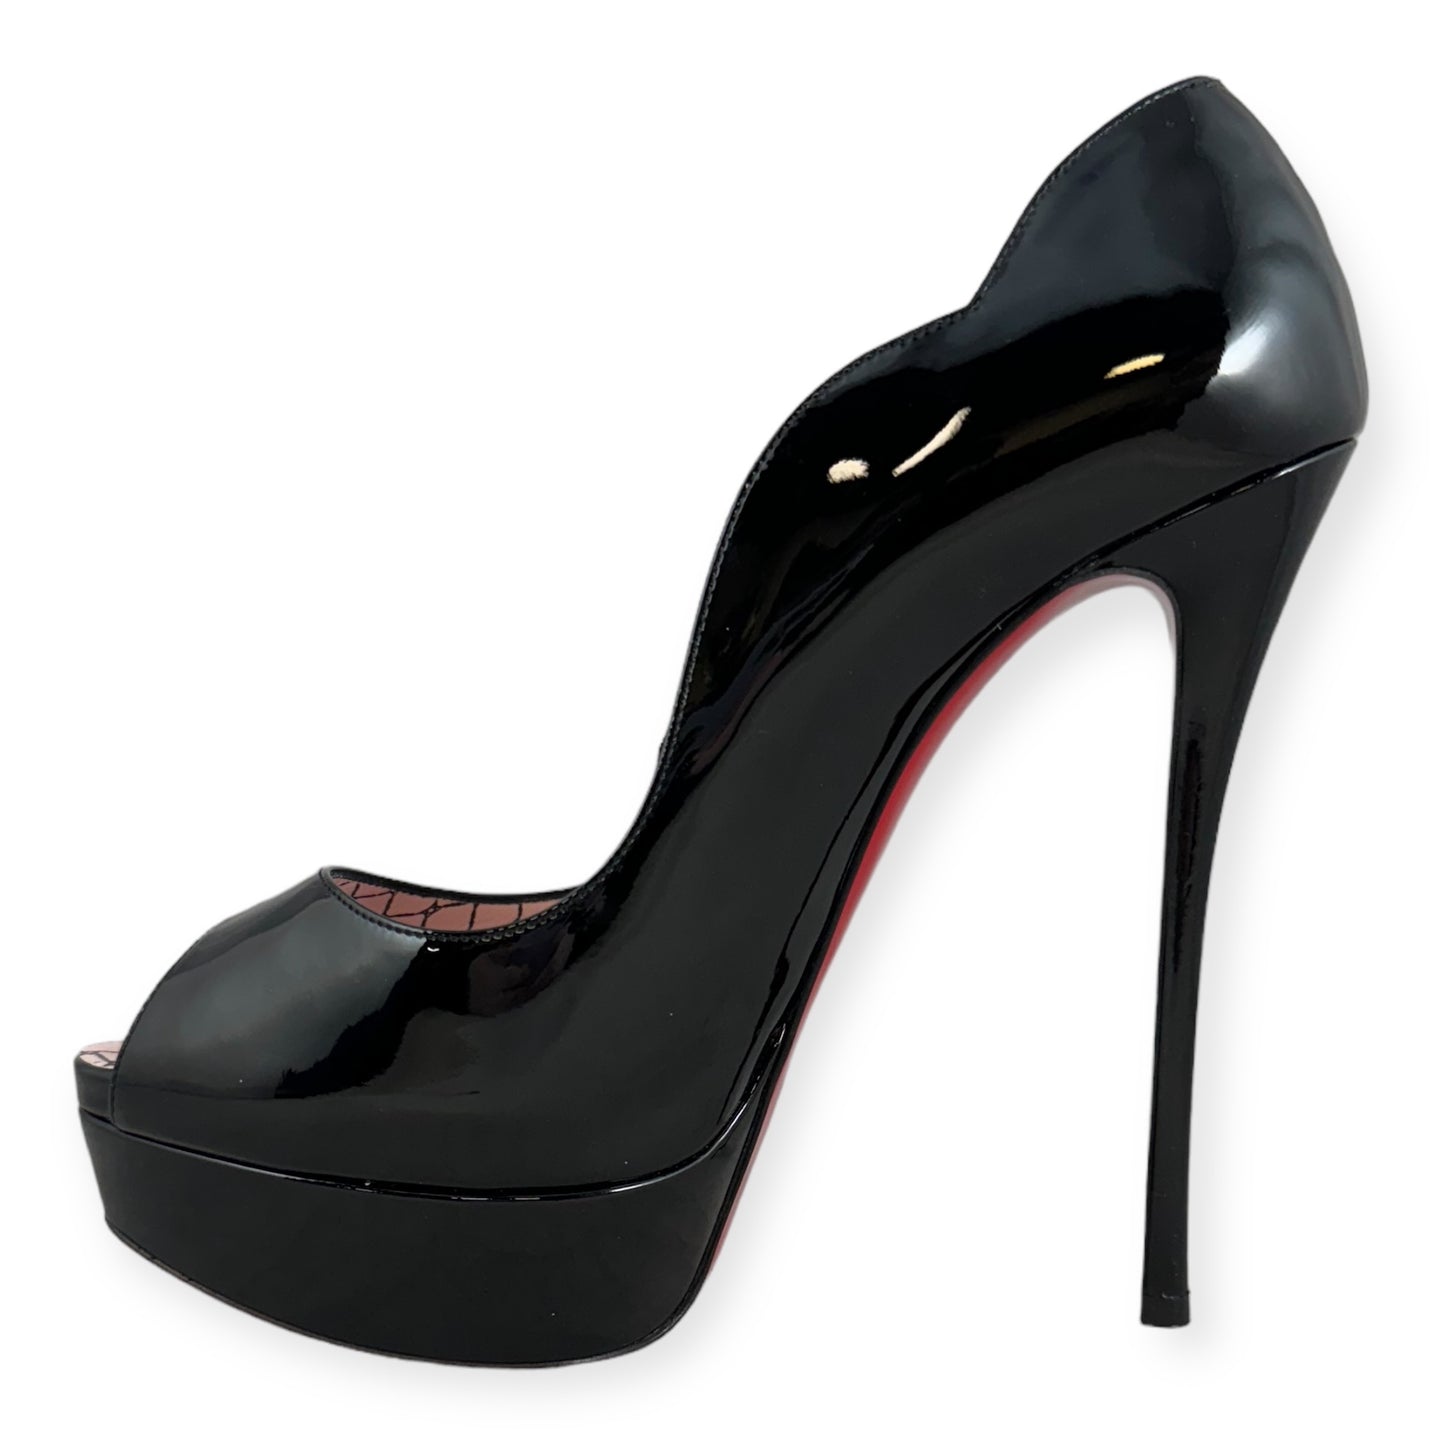 CHRISTIAN LOUBOUTIN Chick Up Alta Pumps in Black | Size 39.5